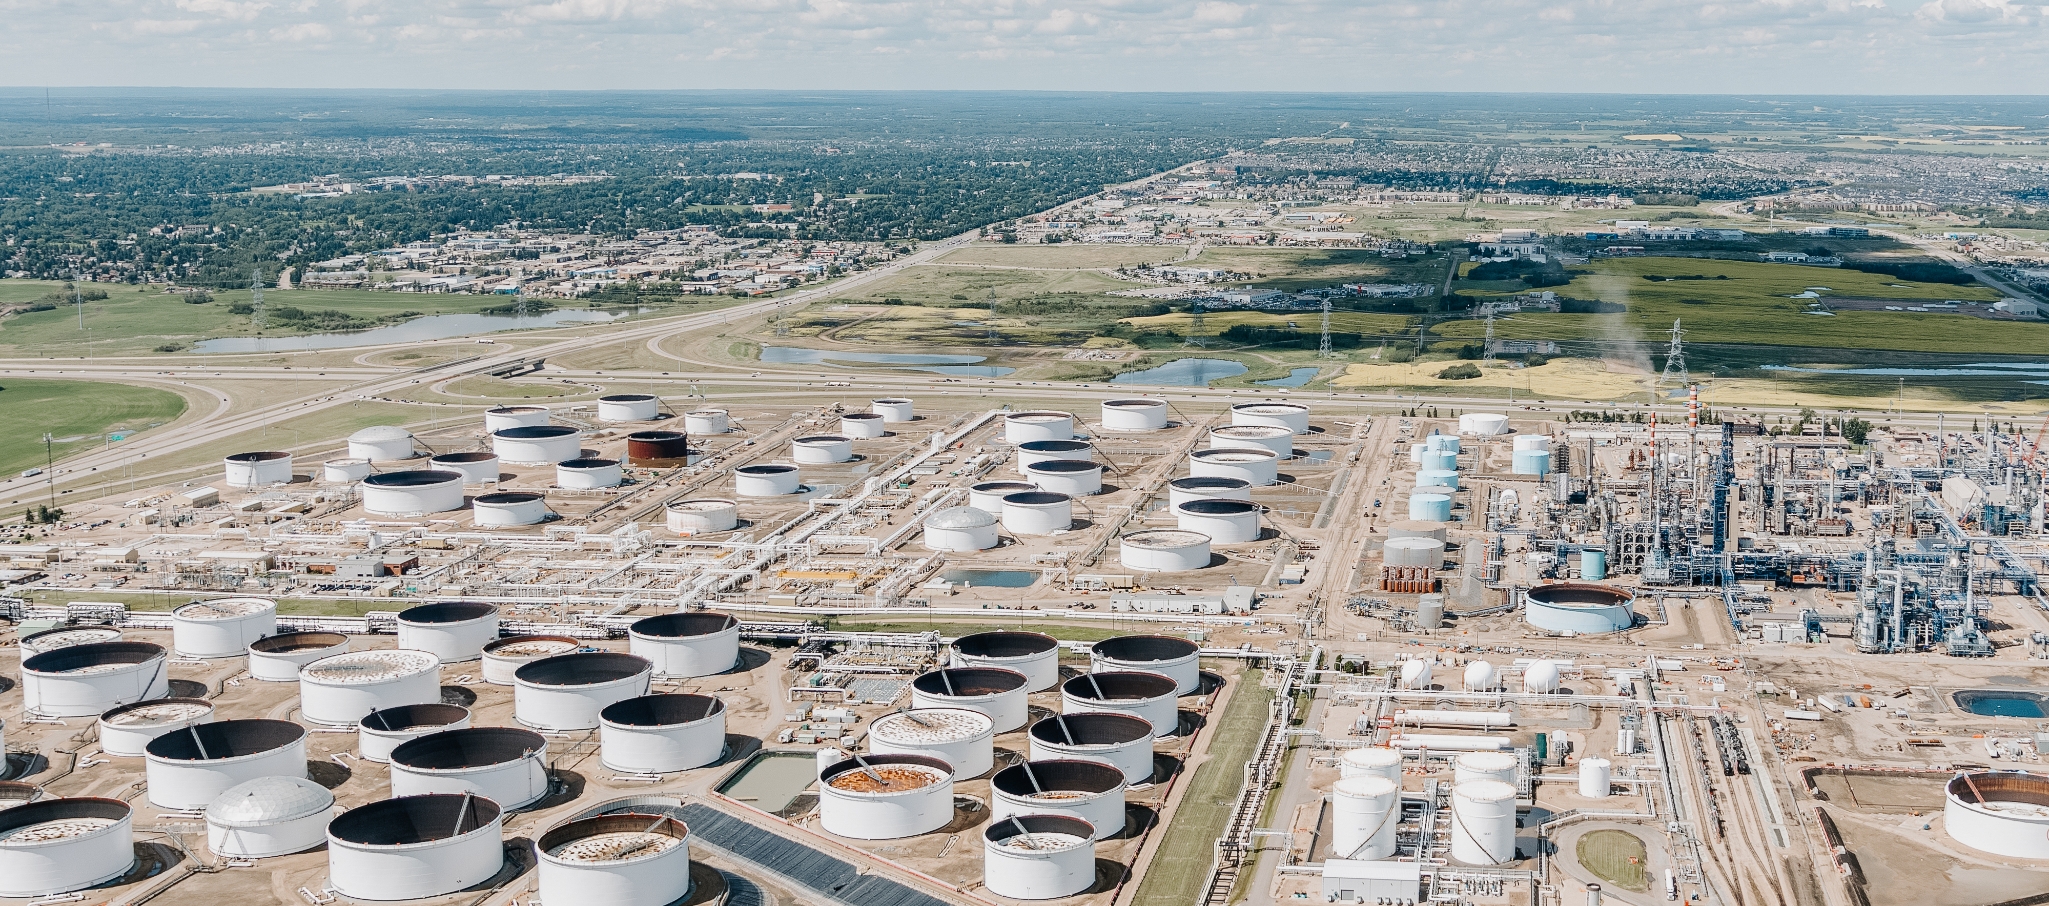 Birds-eye-view of an oil refinery site.